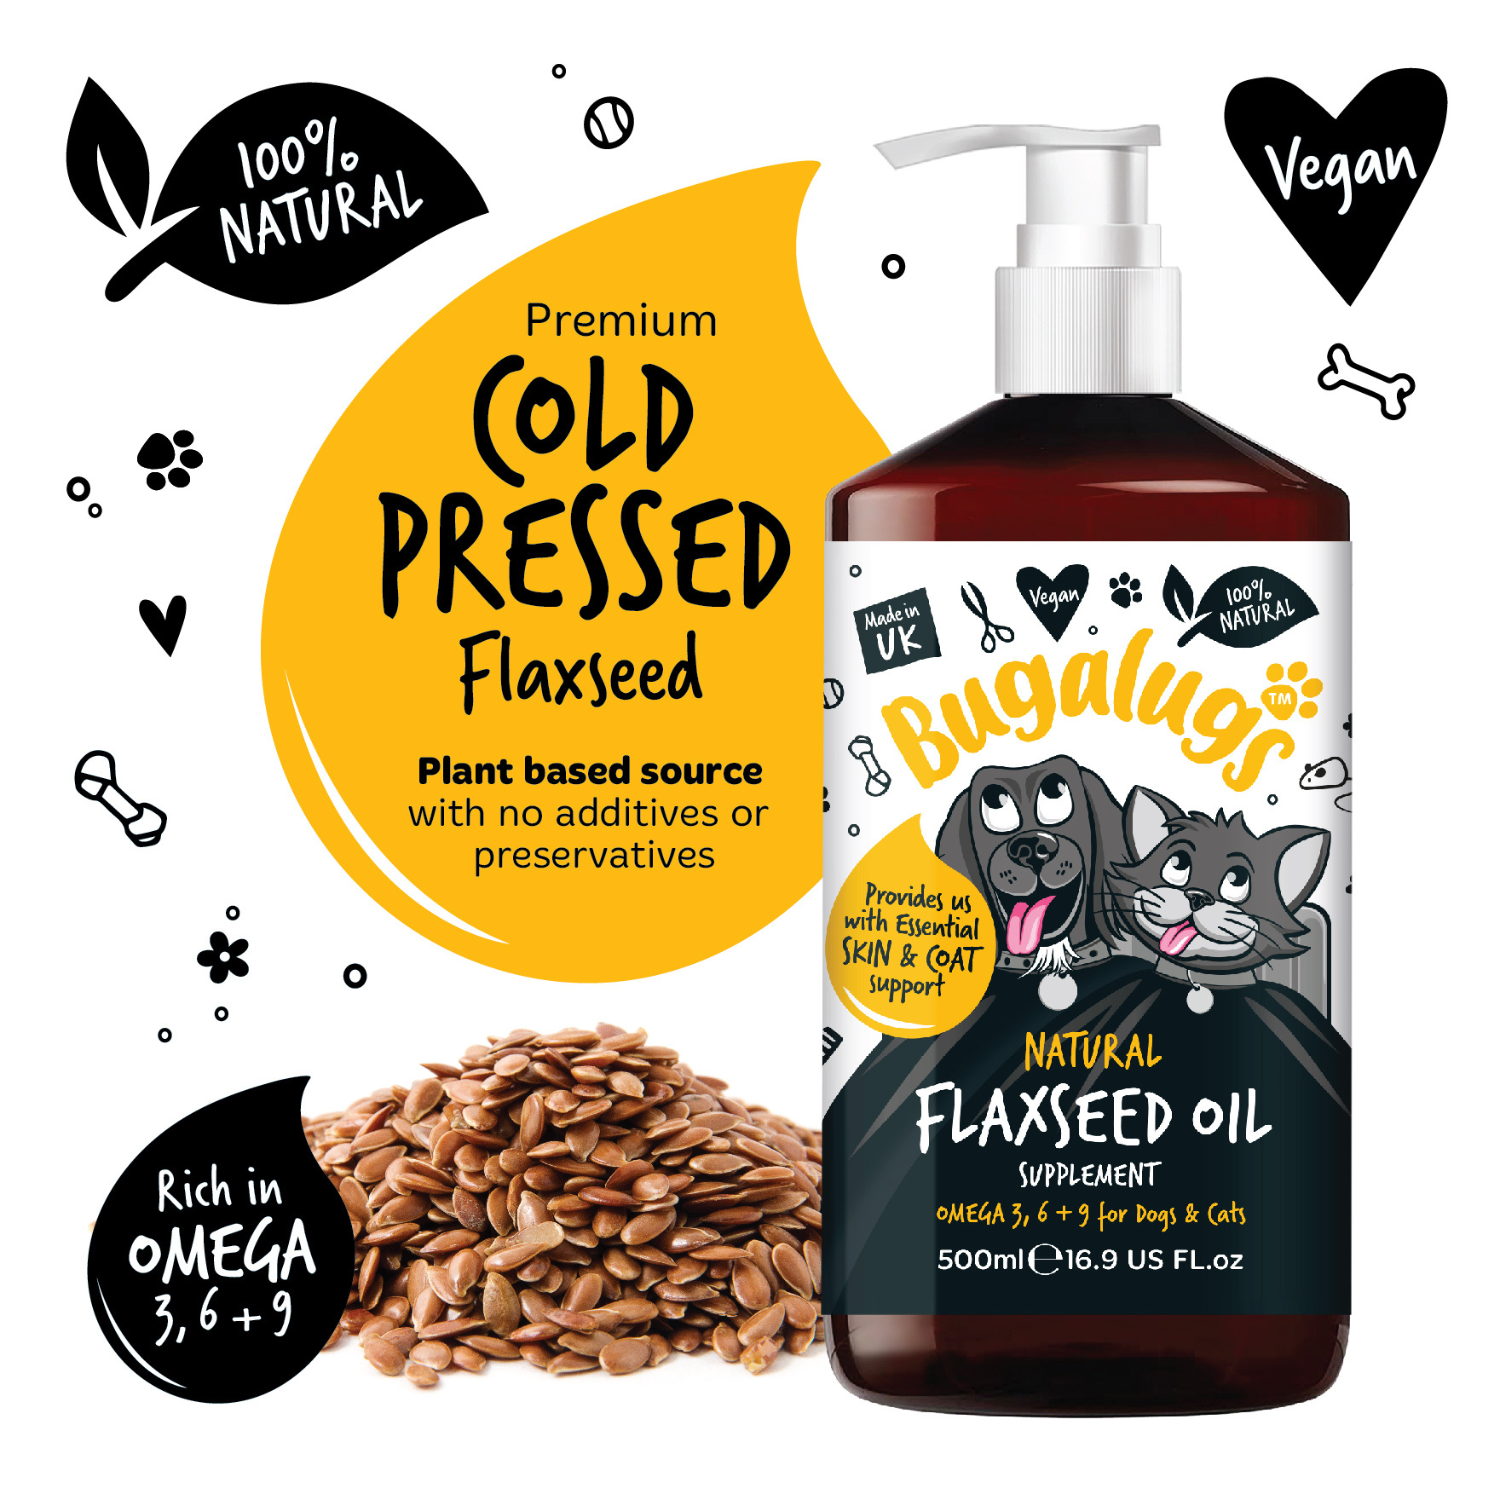 Bugalugs Natural Flaxseed Oil Supplement - Plant-based source with no additives or preservatives